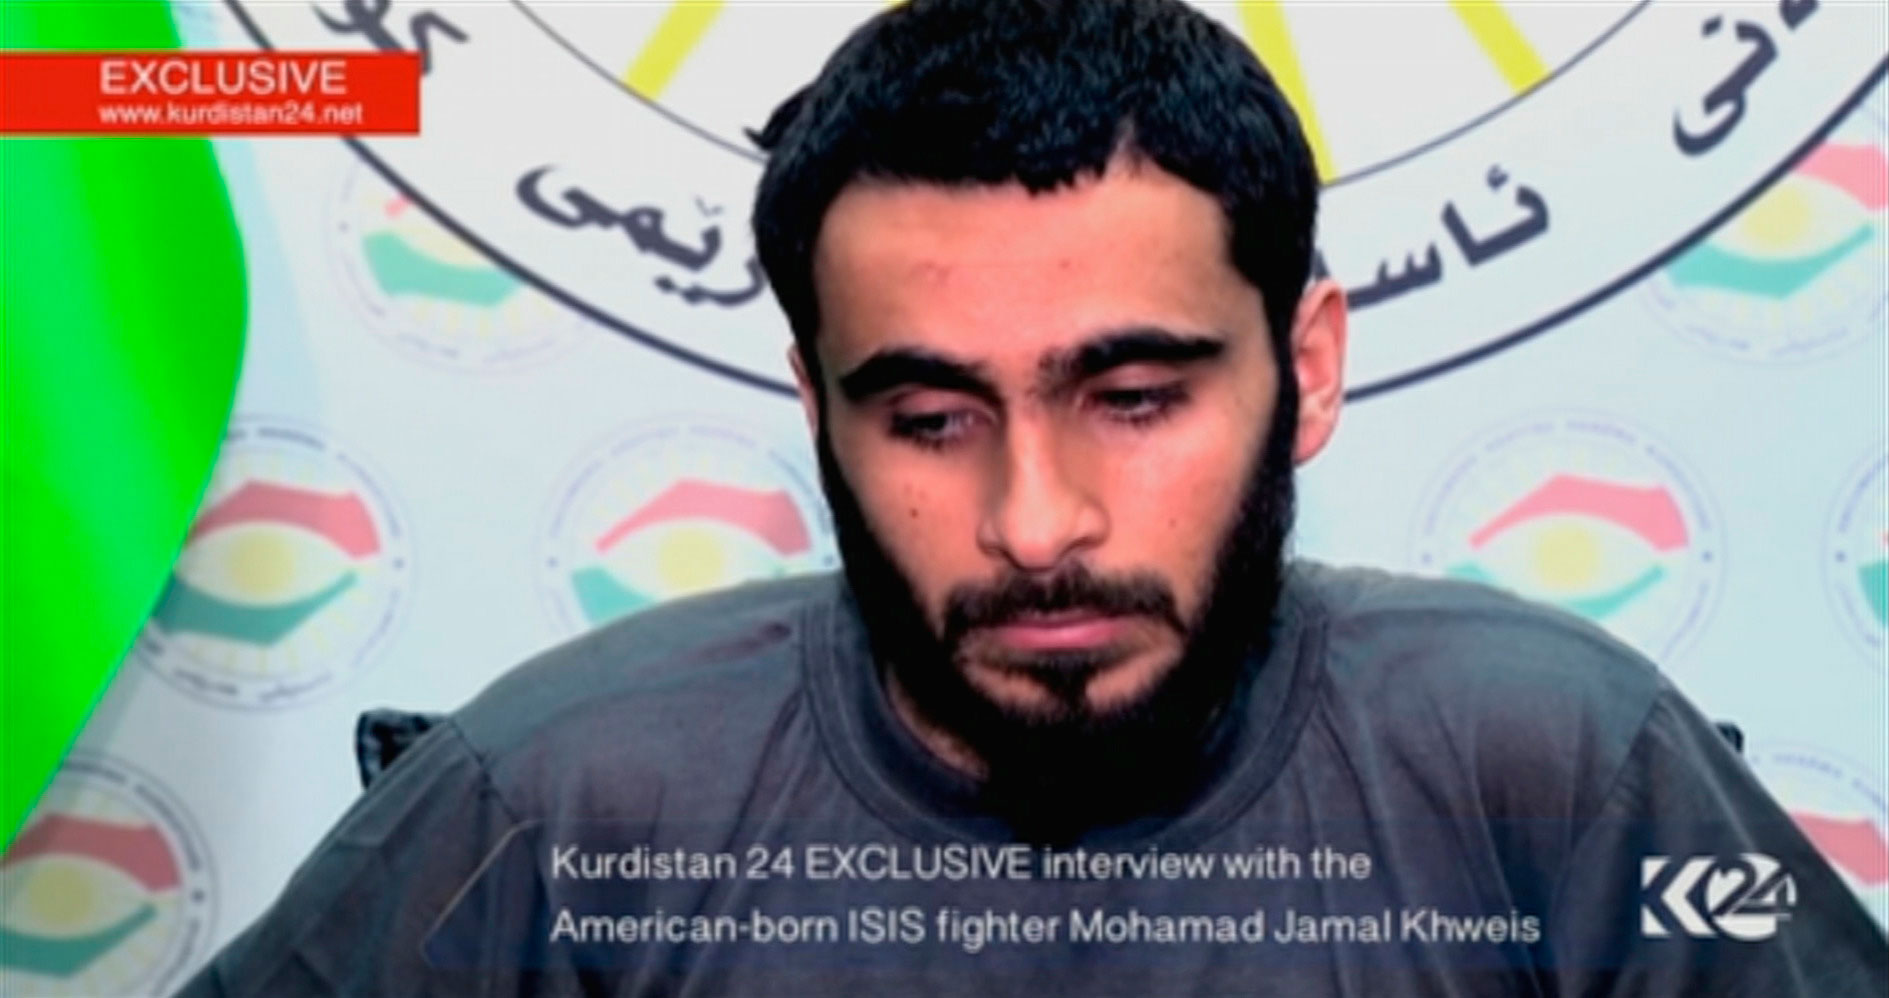 In this still image taken from video on March 16, 2016, a man whose driver's license identifies him as an American speaks during an interview after he said he joined ISIS but later left and was captured by Kurdish forces.